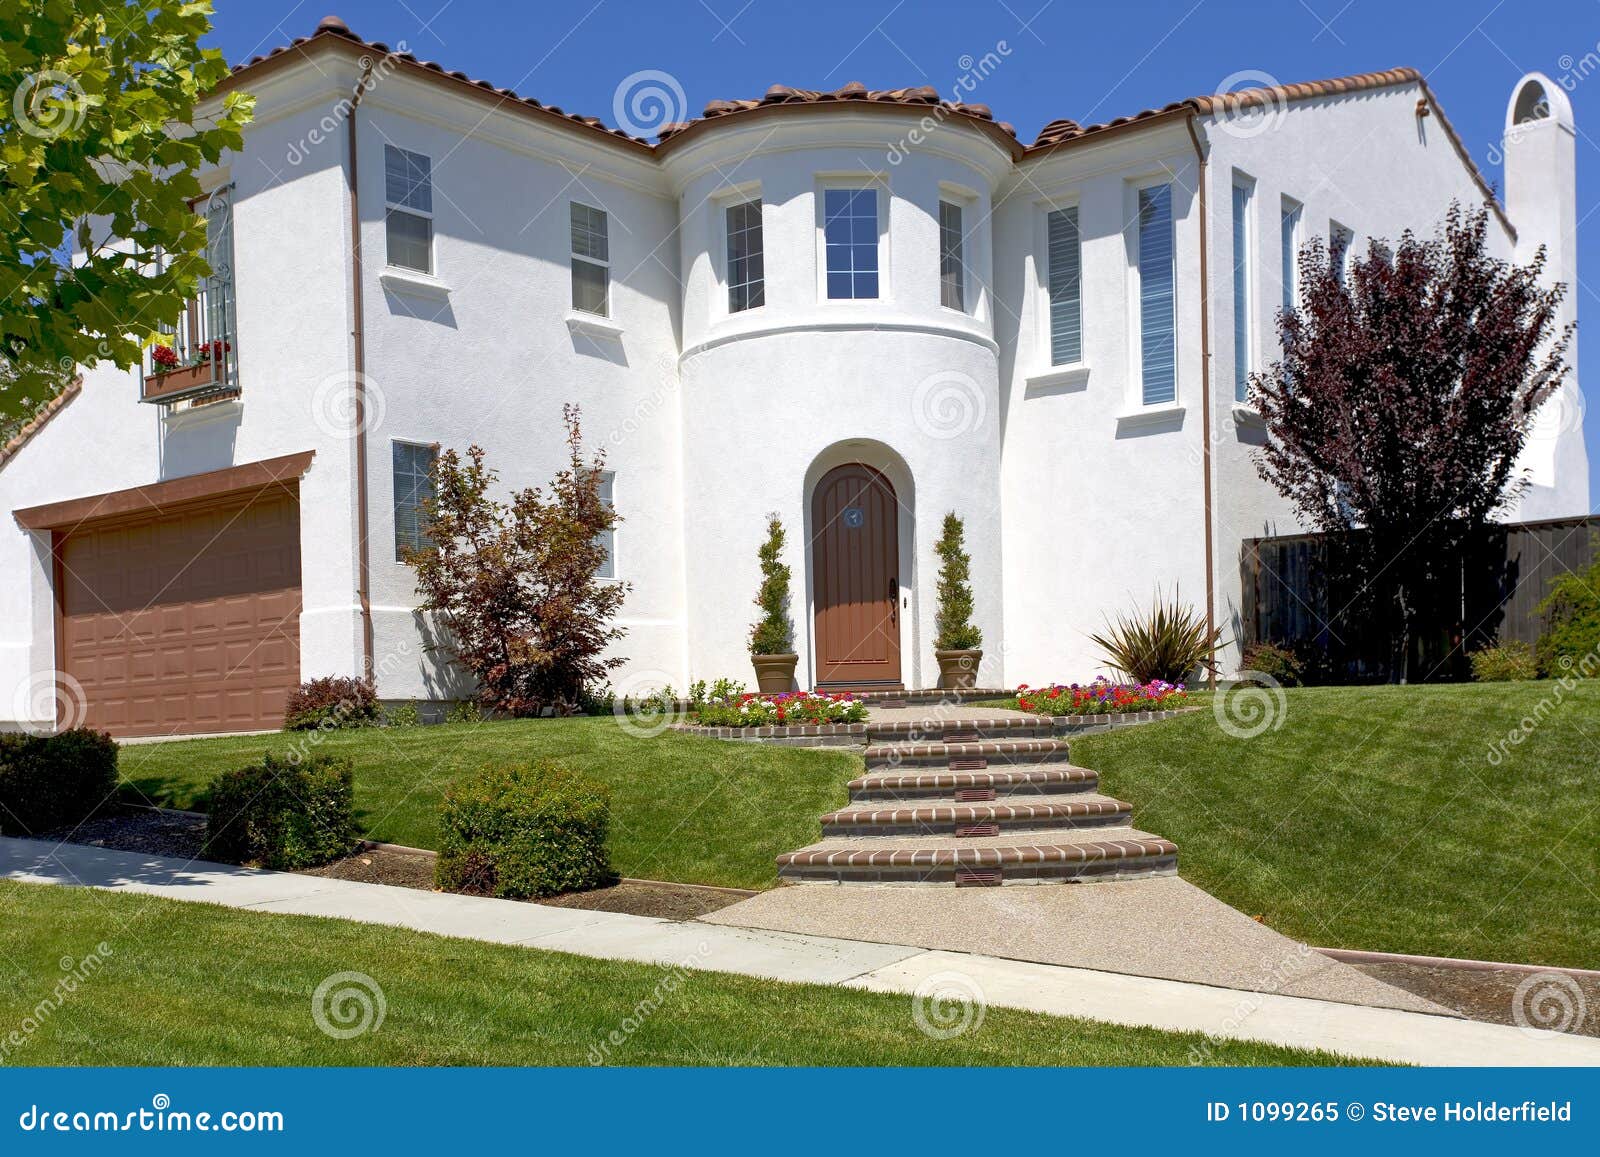 Large Spanish Style Home With A Turret Royalty Free Stock Photo ...